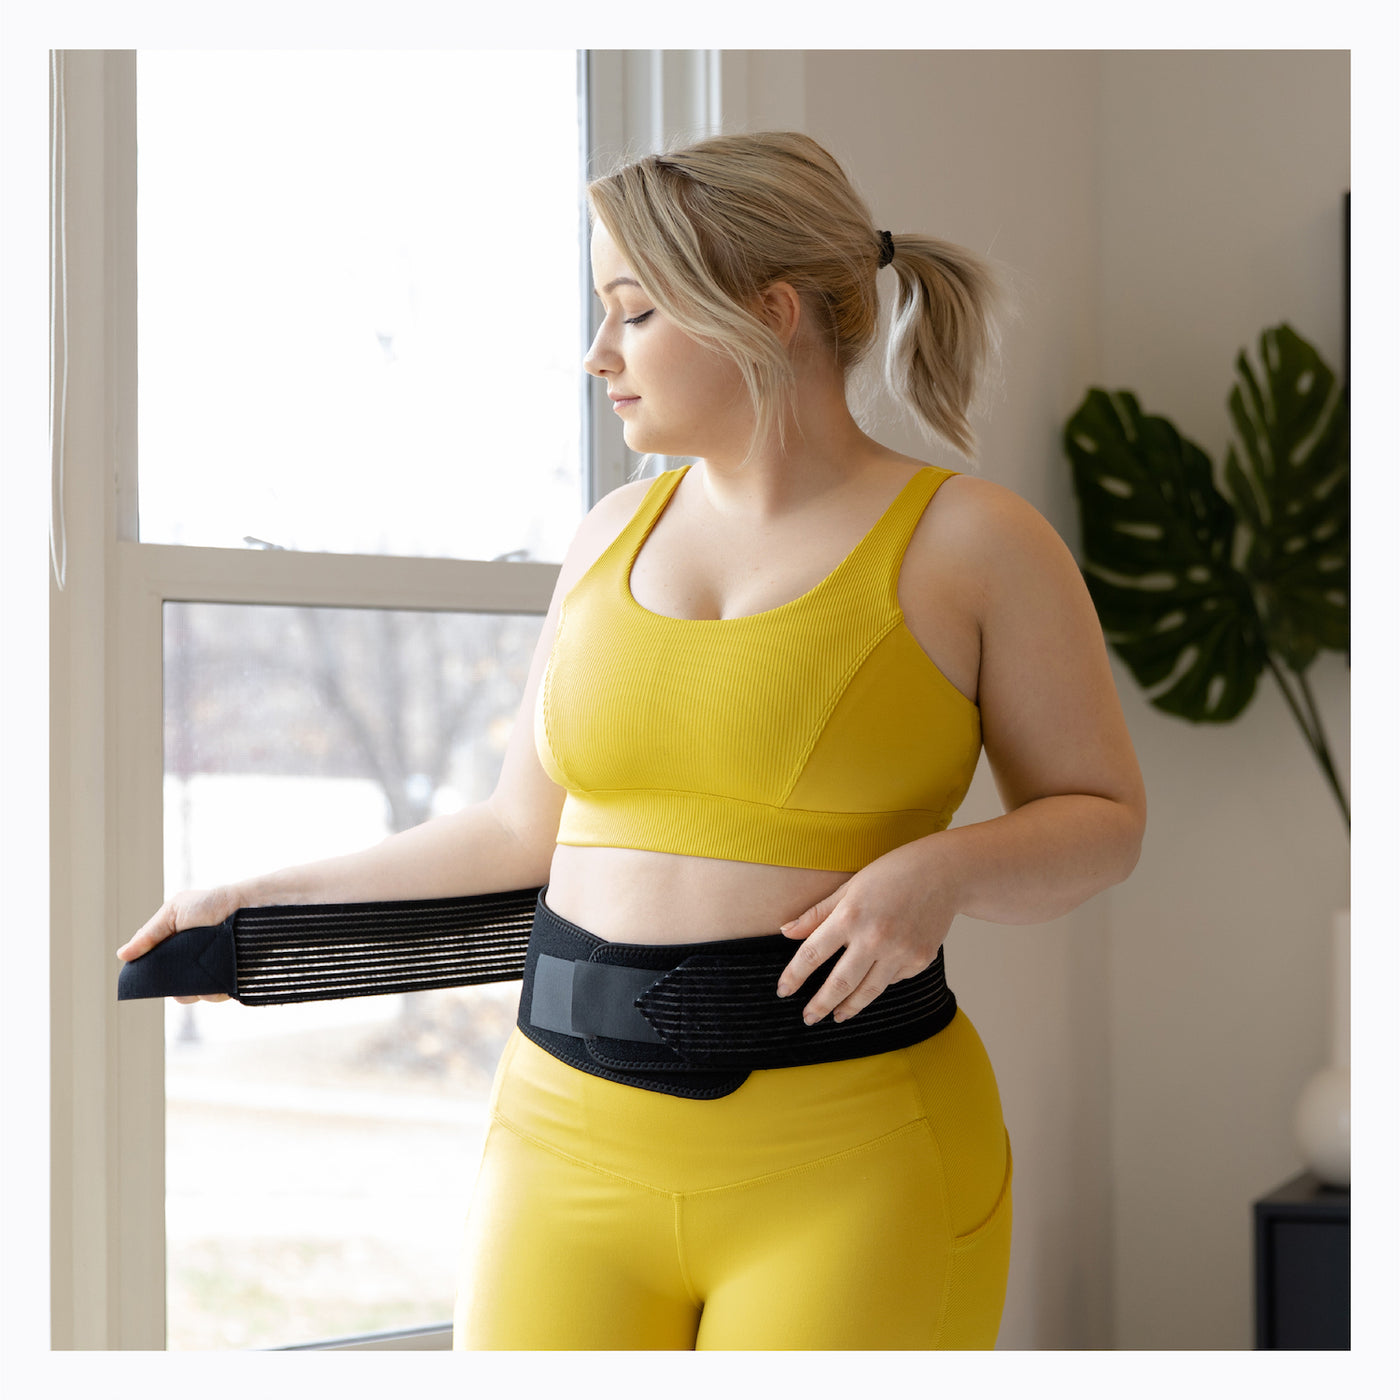 The sacroiliac belt sciatica treatment brace can be worn during the day or while sleeping